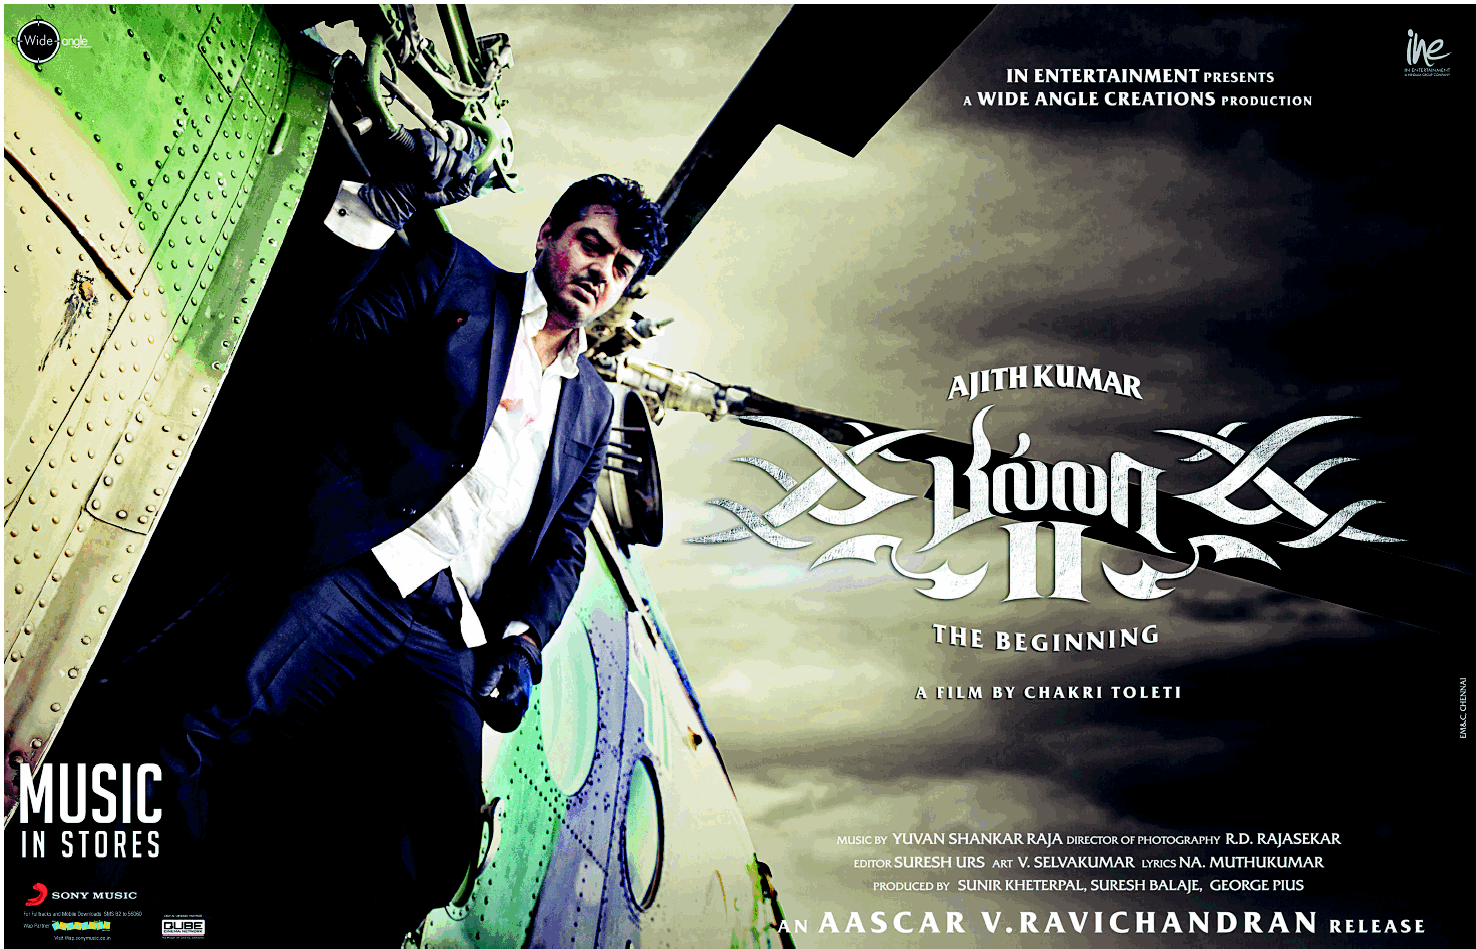 Free Download Billa 2 Tamil Movie Latest Wallpapers Urs Sridharkatta09 1476x949 For Your Desktop Mobile Tablet Explore 50 Tamil Comments Wallpaper Tamil Comments Wallpaper Funny Comments Wallpapers Tamil Actor Surya Wallpaper A prequel to the 2007 film billa, billa 2 shows the transformation of a sri lankan tamil refugee, david billa, to the most feared underworld don. wallpapers tamil actor surya wallpaper